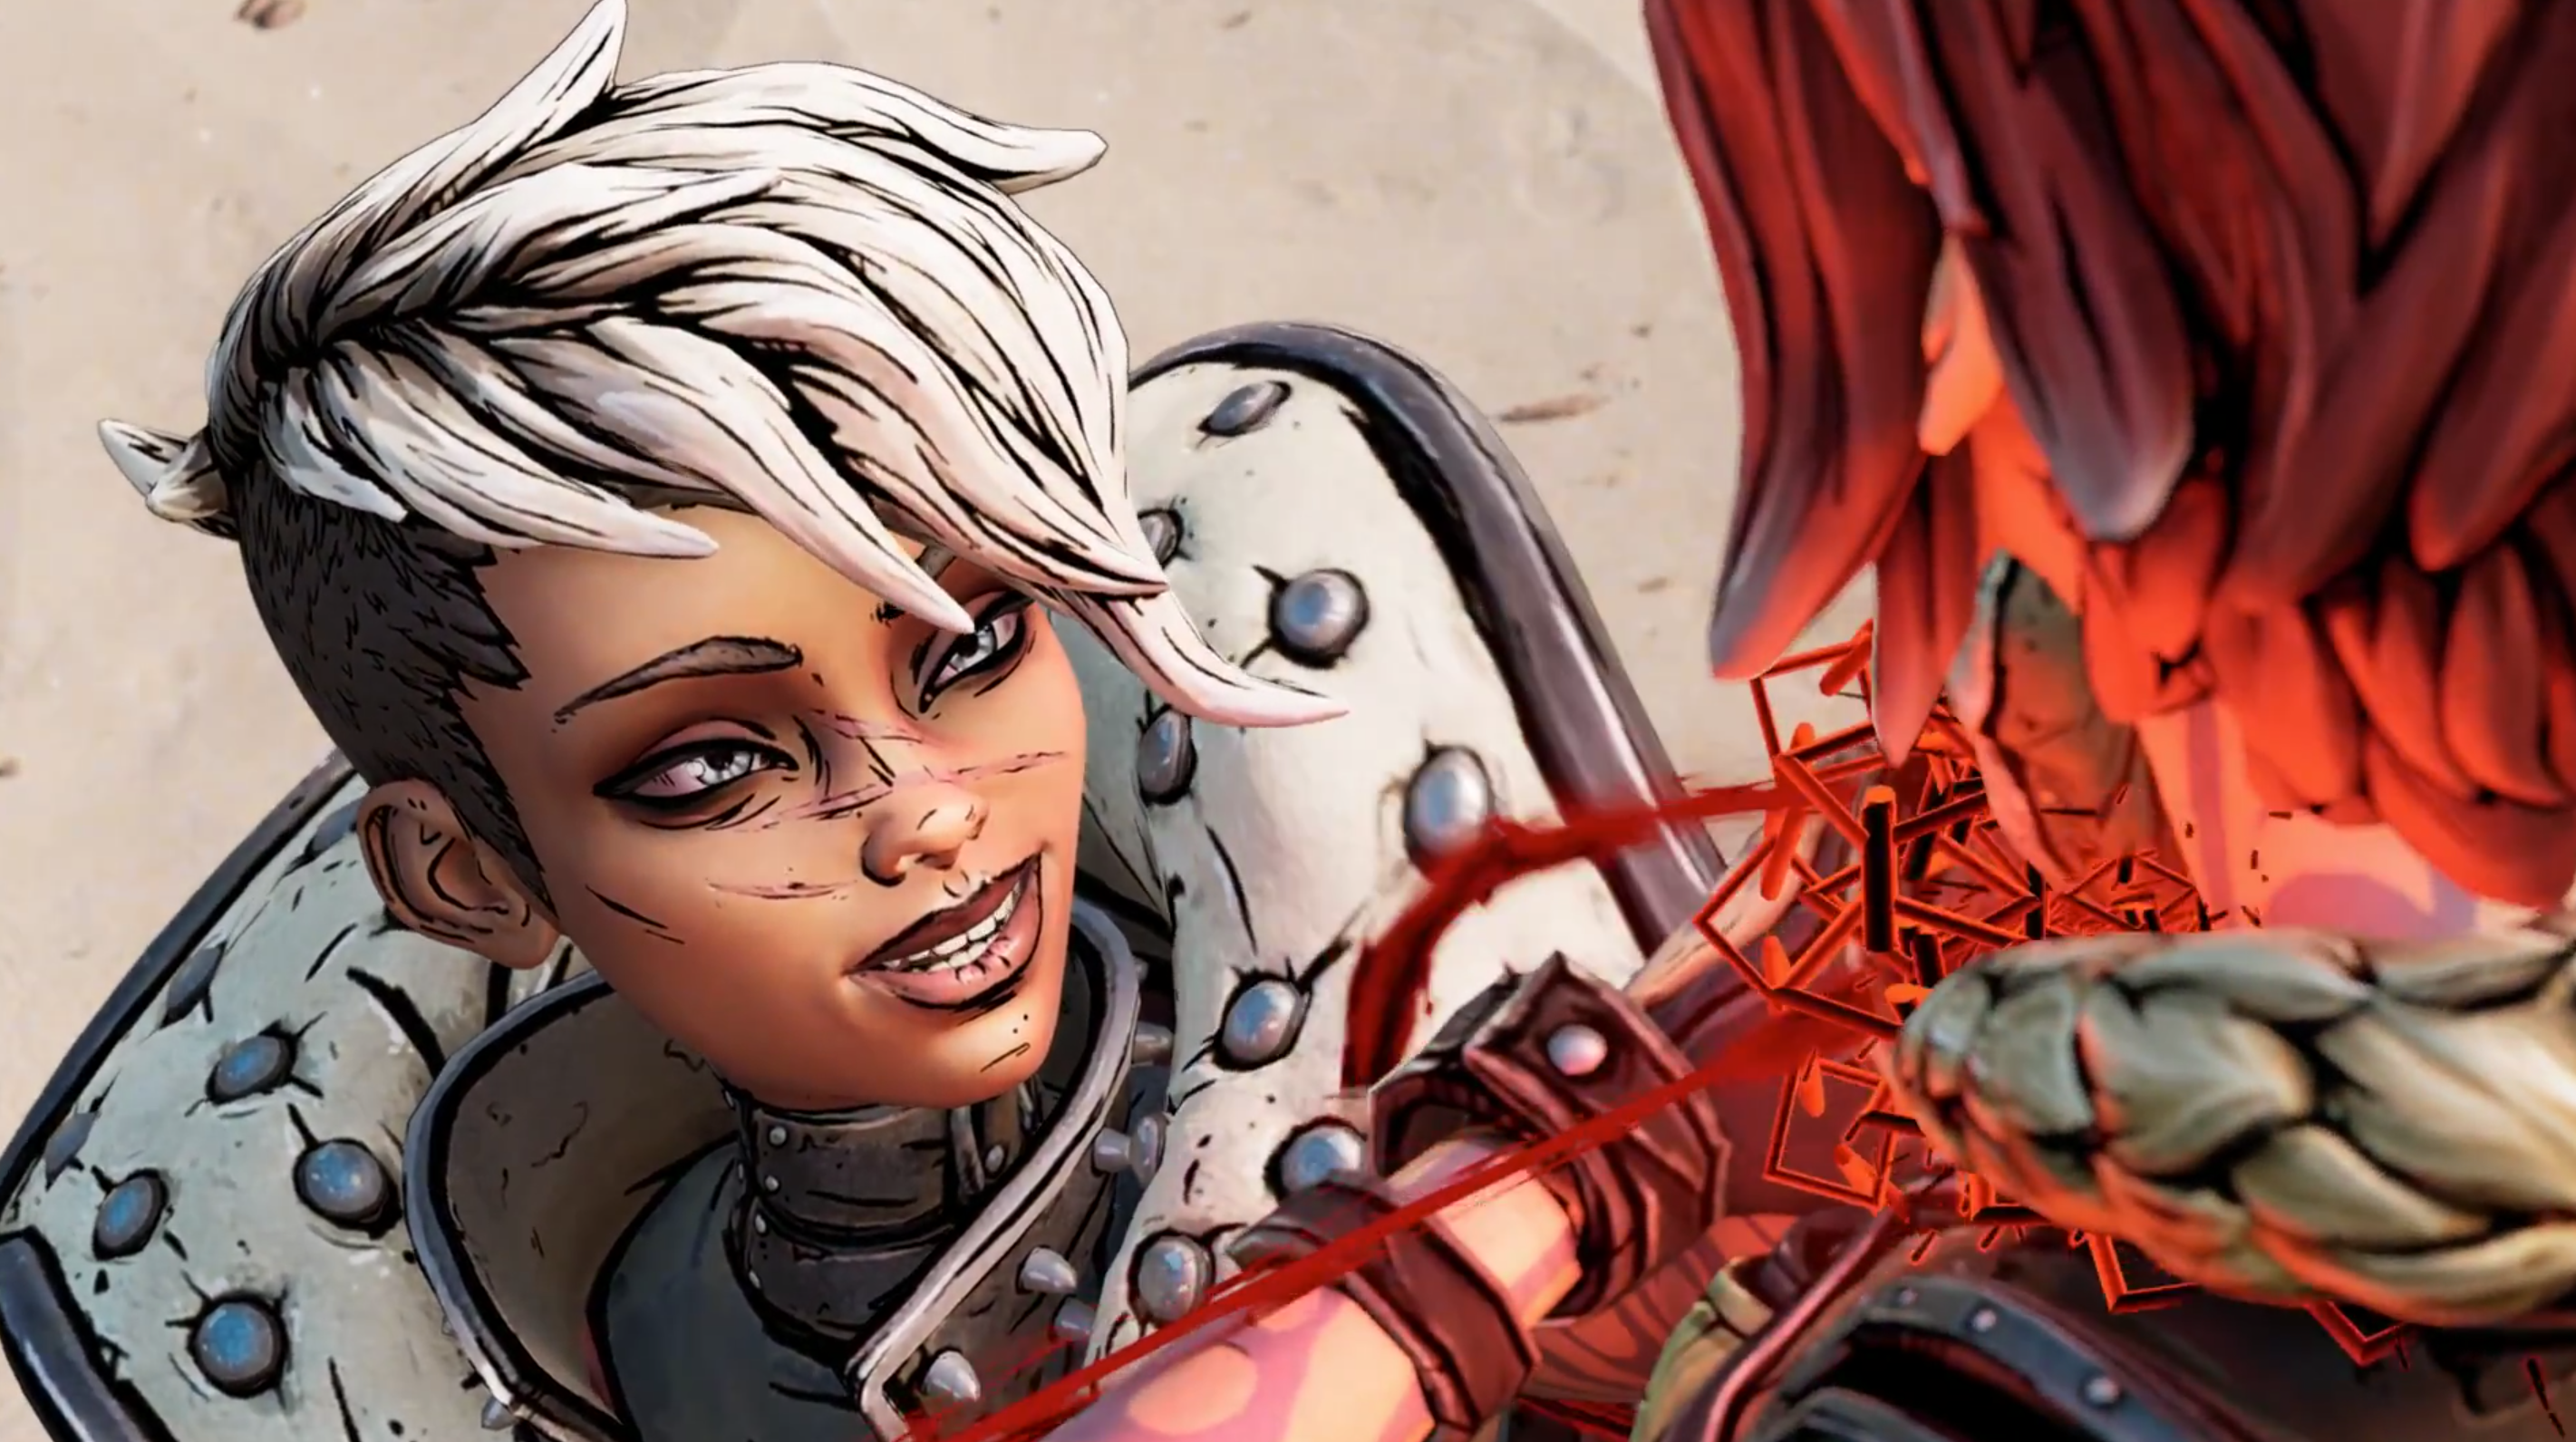 Image for Borderlands 3 Launches with Denuvo Anti-Tamper DRM